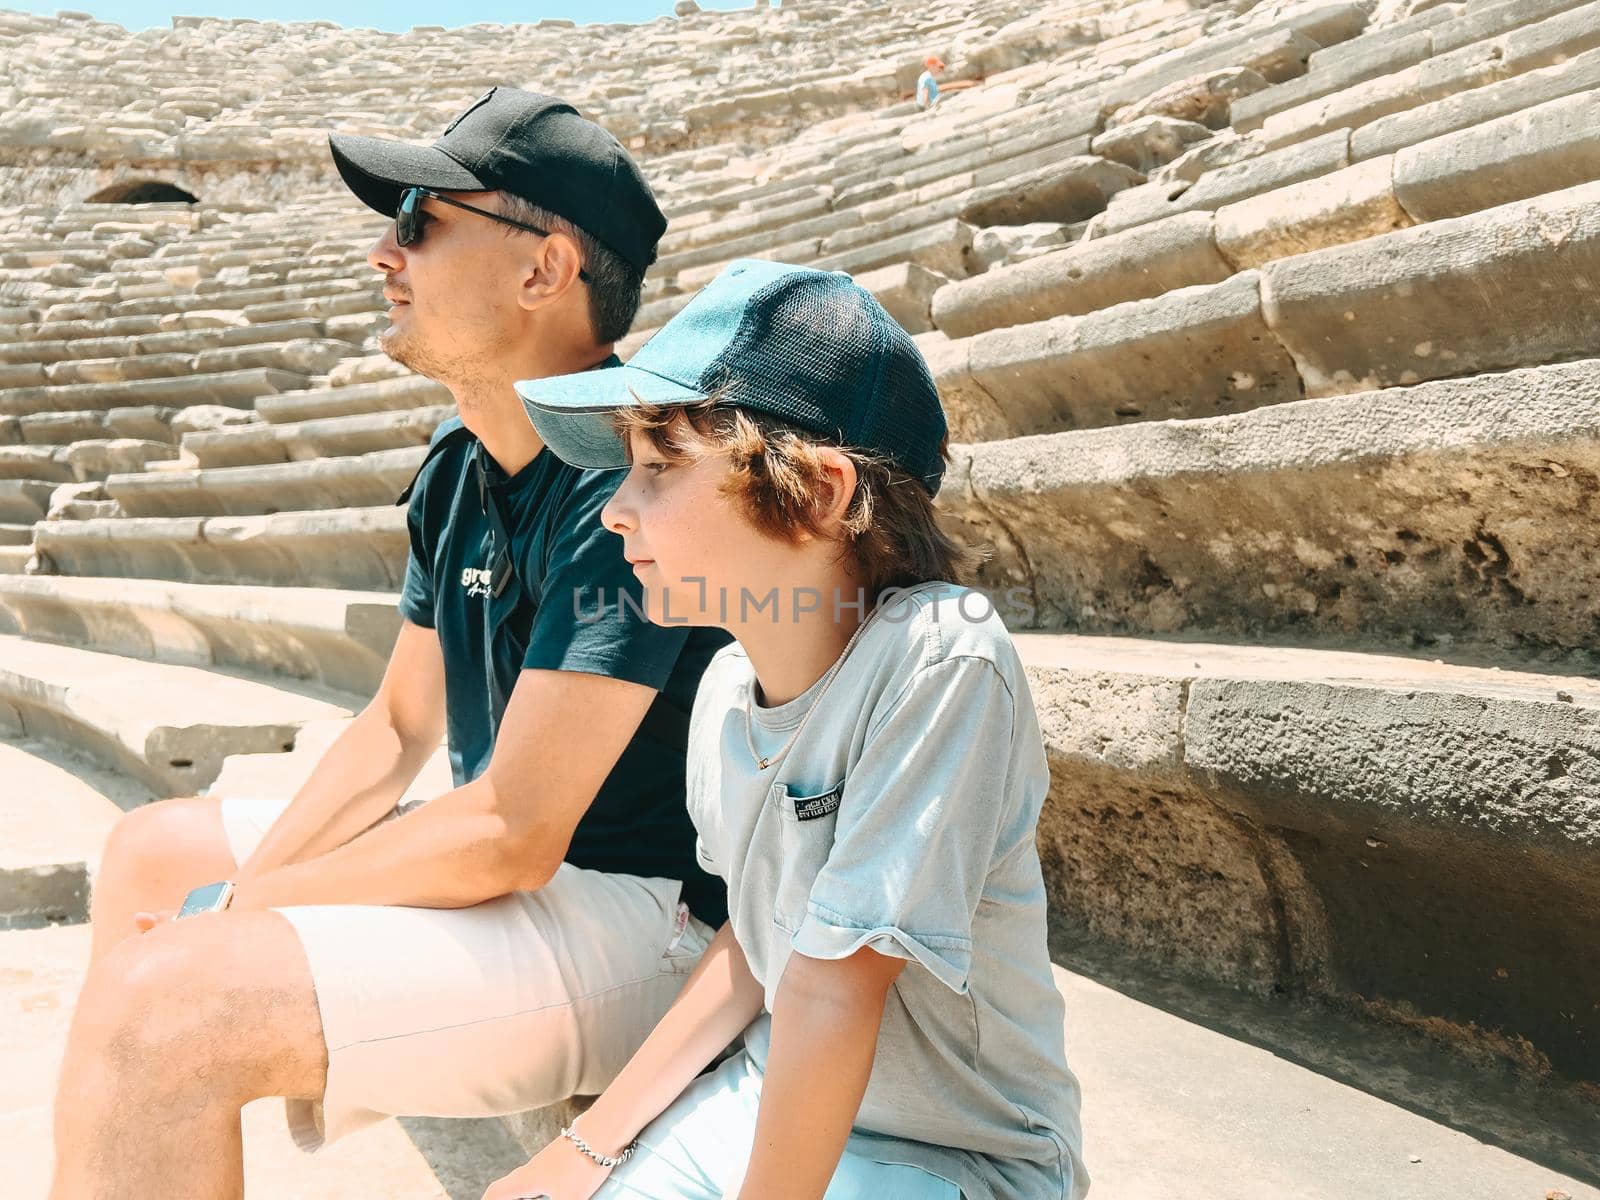 Young father dad and his school boy kid son tourists visiting ancient antique coliseum amphitheater ruins in hot summer day by Ostanina